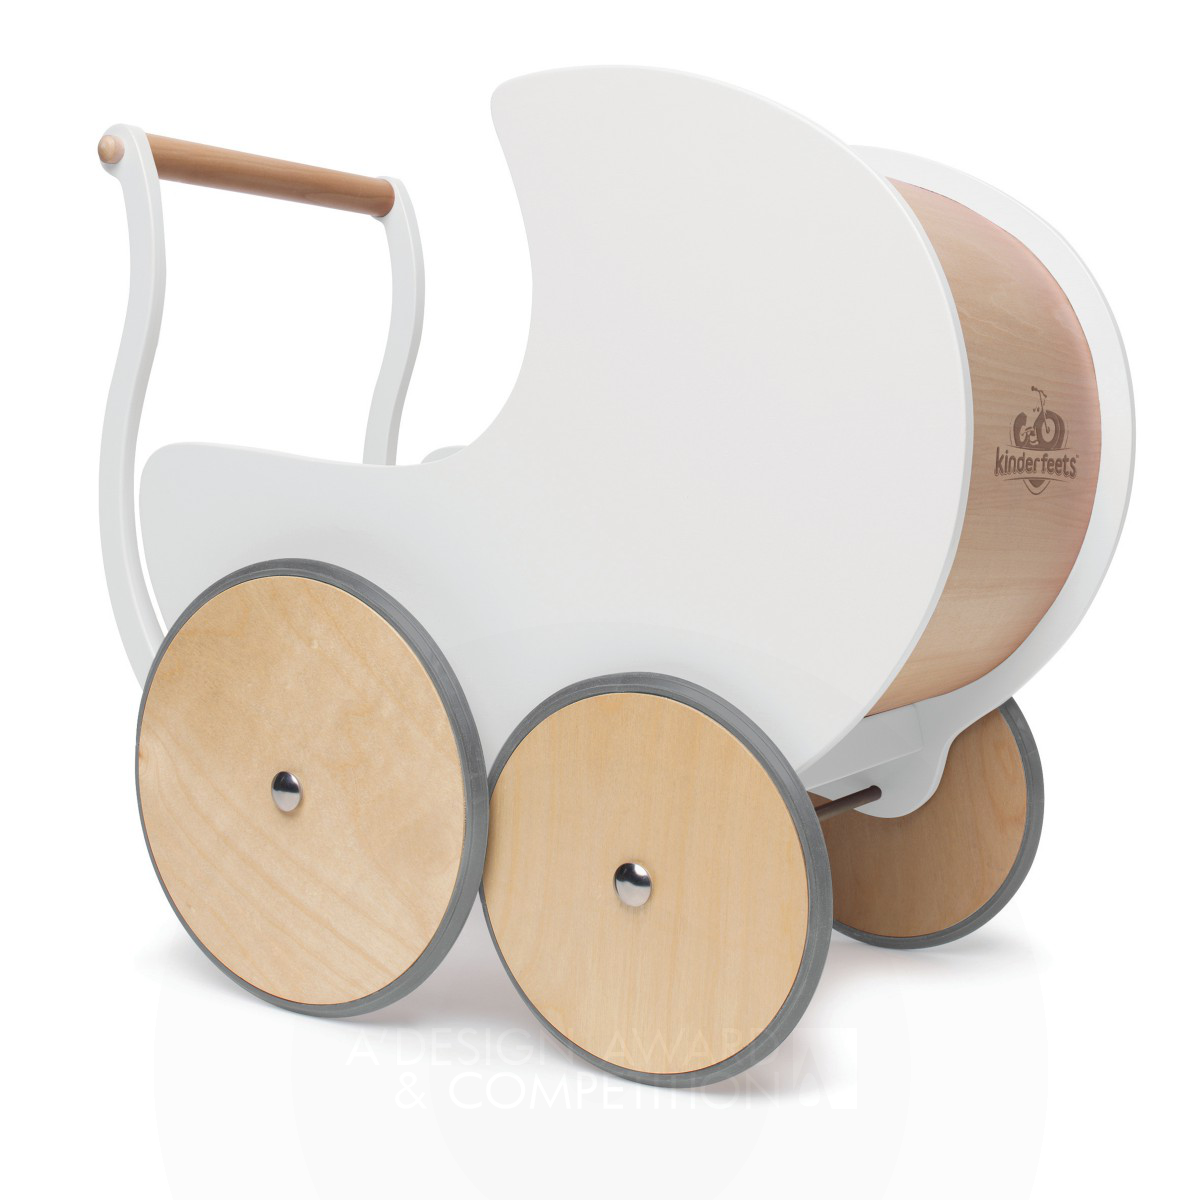 Oscar Mulder wins Bronze at the prestigious A' Toys, Games and Hobby Products Design Award with Kinderfeets Pram Walker.